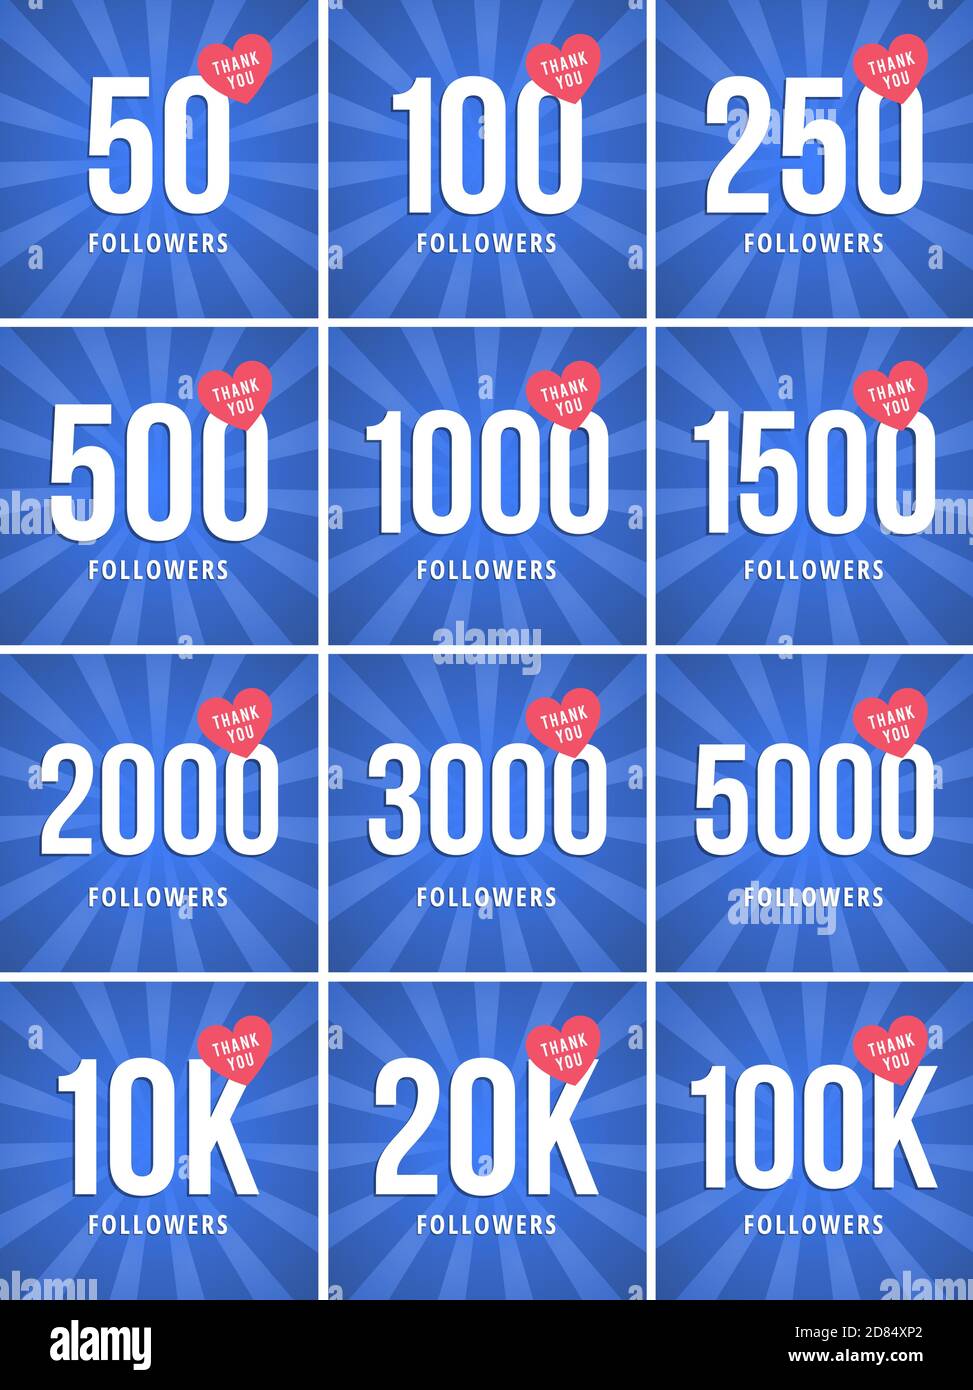 Social media banner with thank you for 50–100K followers. Blue card with Thank you celebrate all subscribers or followers with simple post. Stock Vector